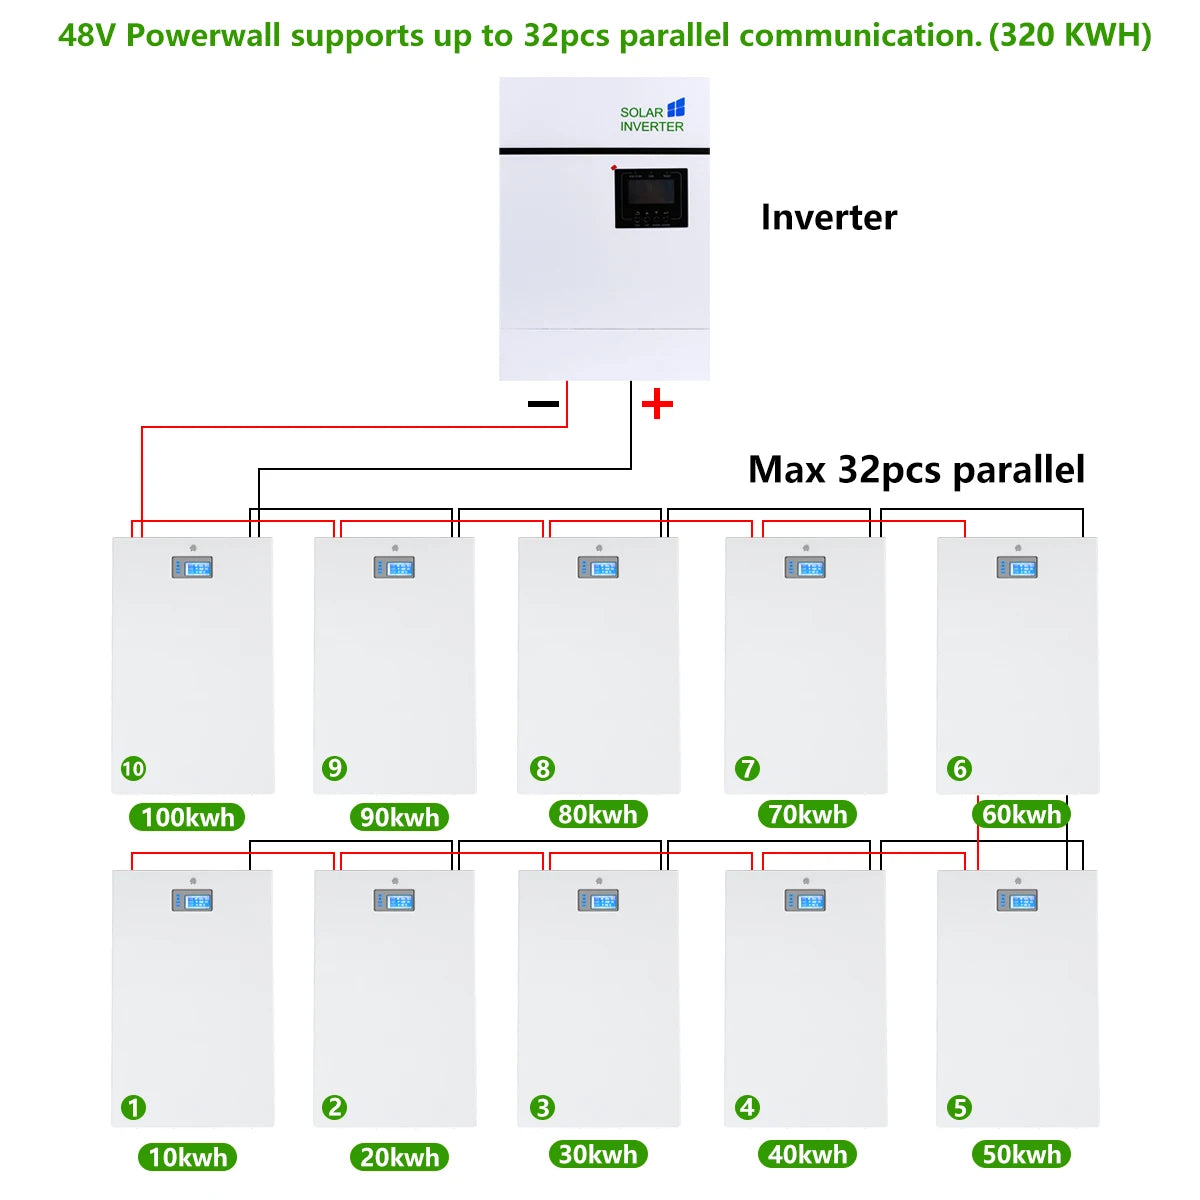 48V 200AH 10KW LiFePO4 Battery, 48V Powerwall supports up to 32 connections for 320KWh capacity and scalable inverters for varying power levels.